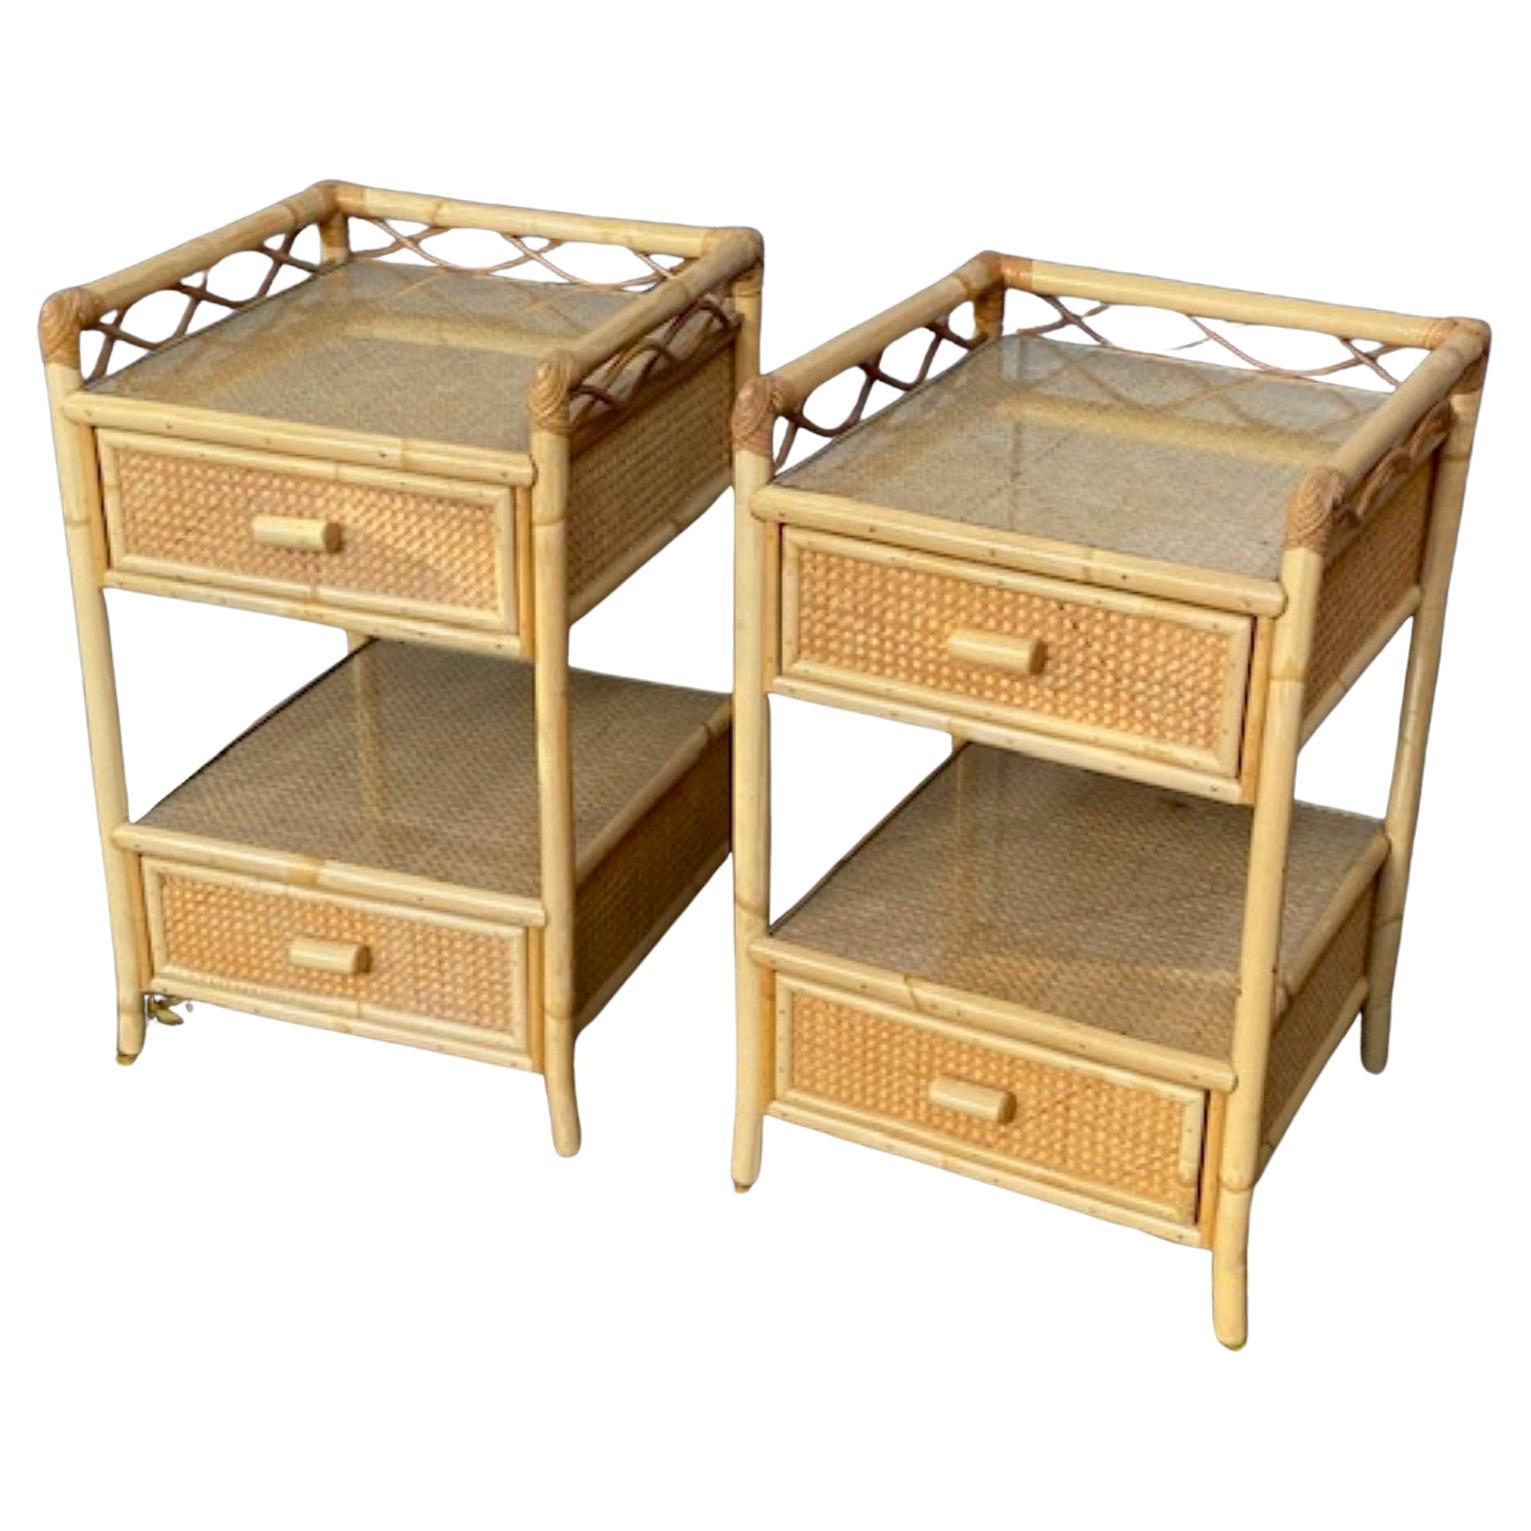 Pair of MCM Rattan / Cane Nightstands / Bedside Tables, Angraves, English, 1970s For Sale